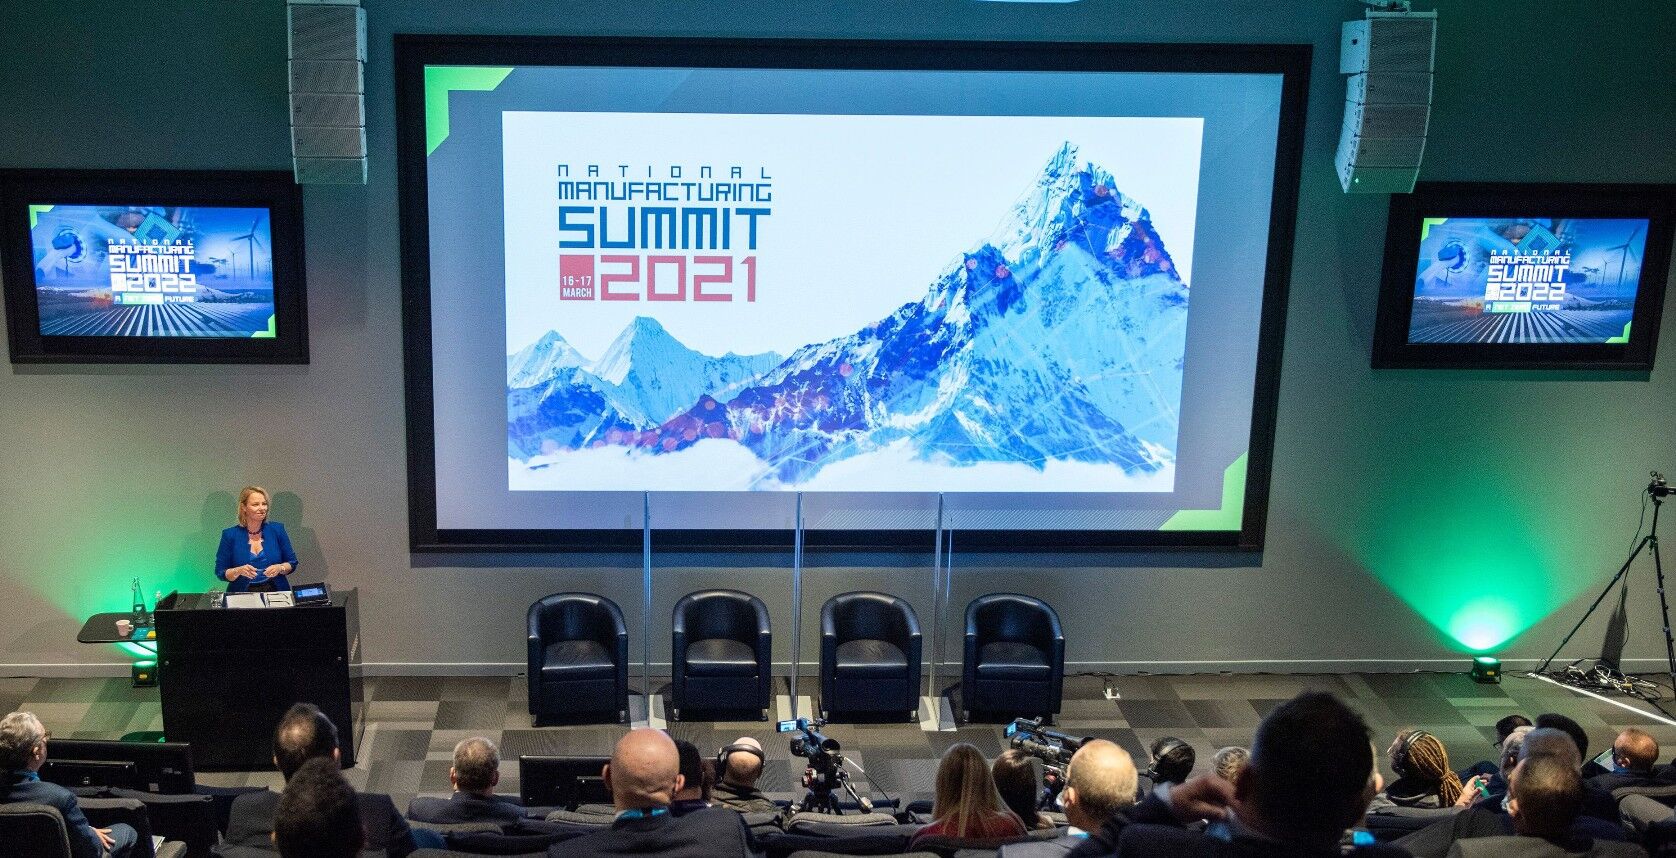 Sustainable manufacturing is high-powered summit focus